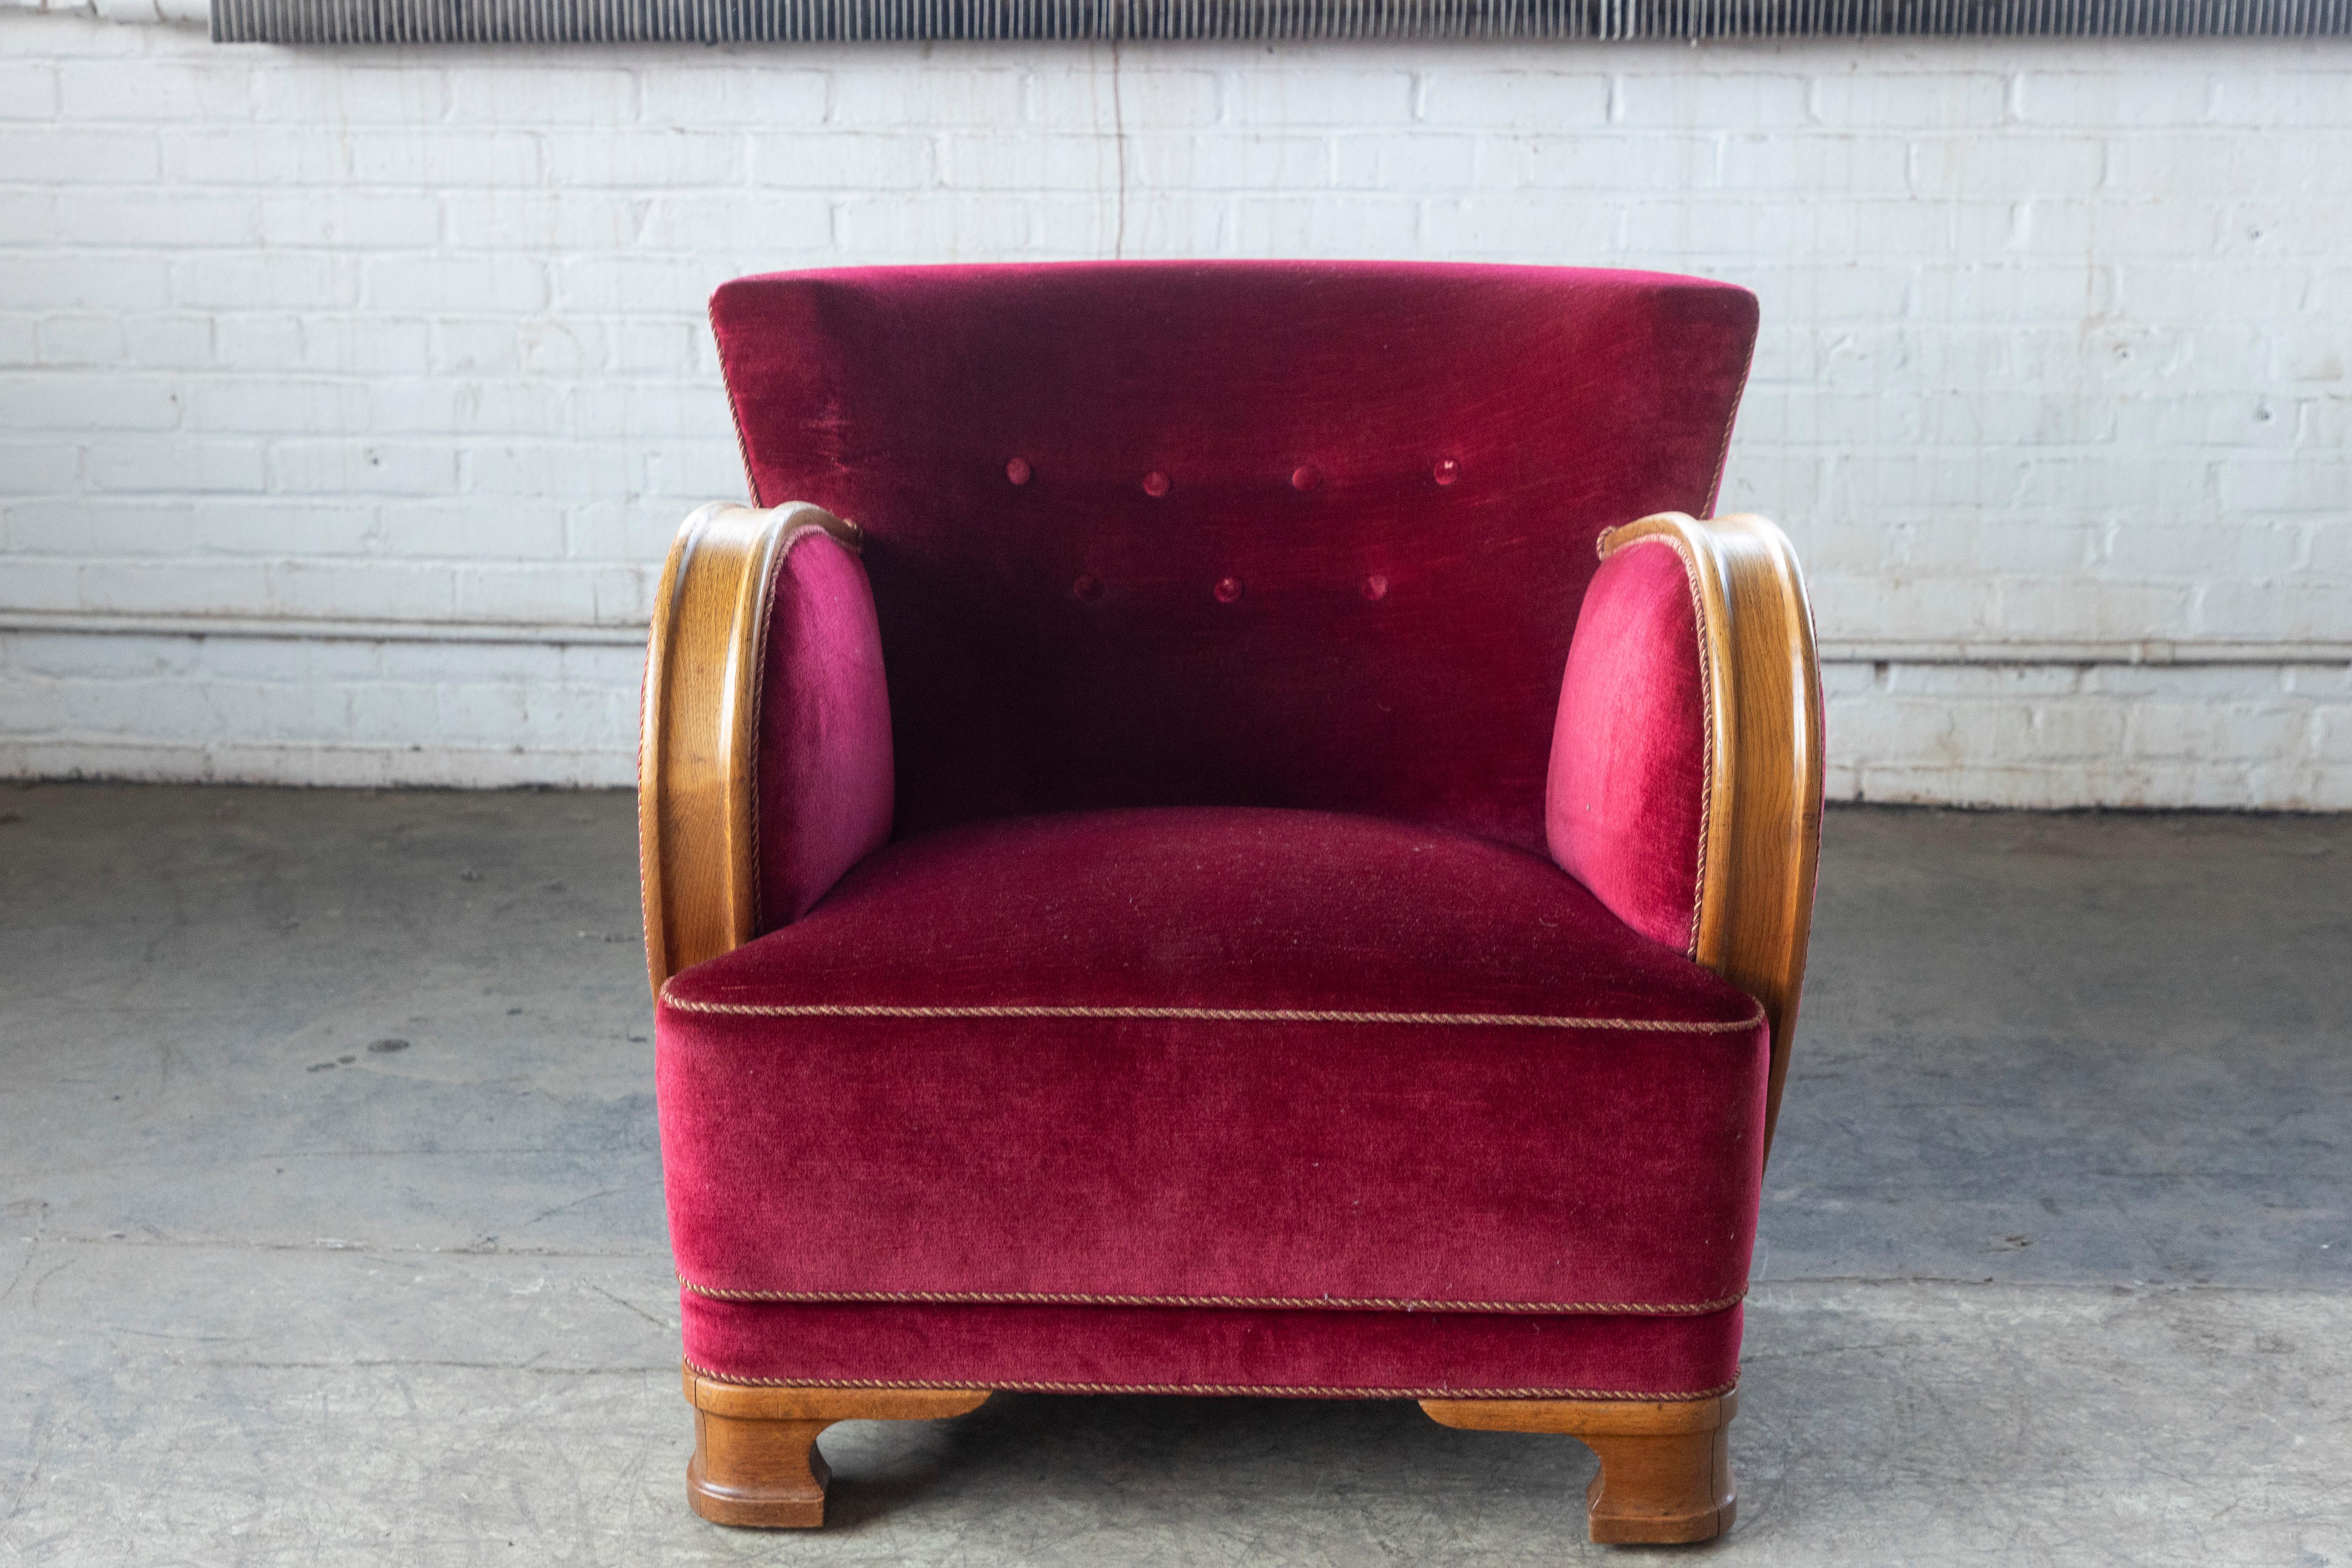 Mid-20th Century 1930-40s Danish Art Deco or Early Midcentury Lounge Chair in Red Mohair